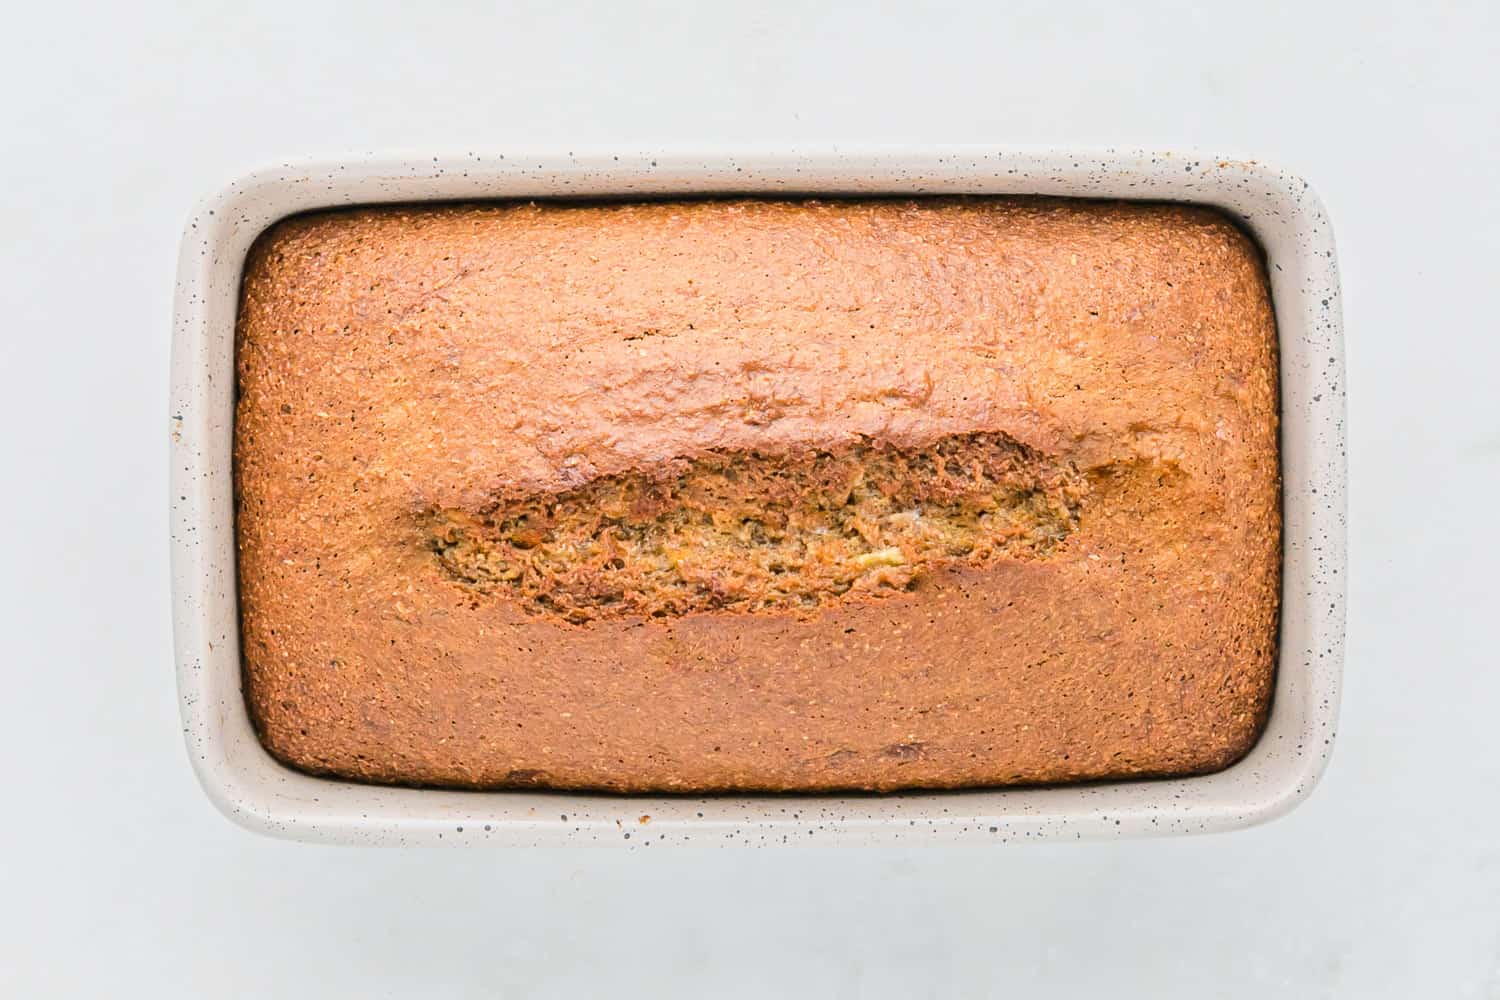 Baked banana bread in loaf pan.